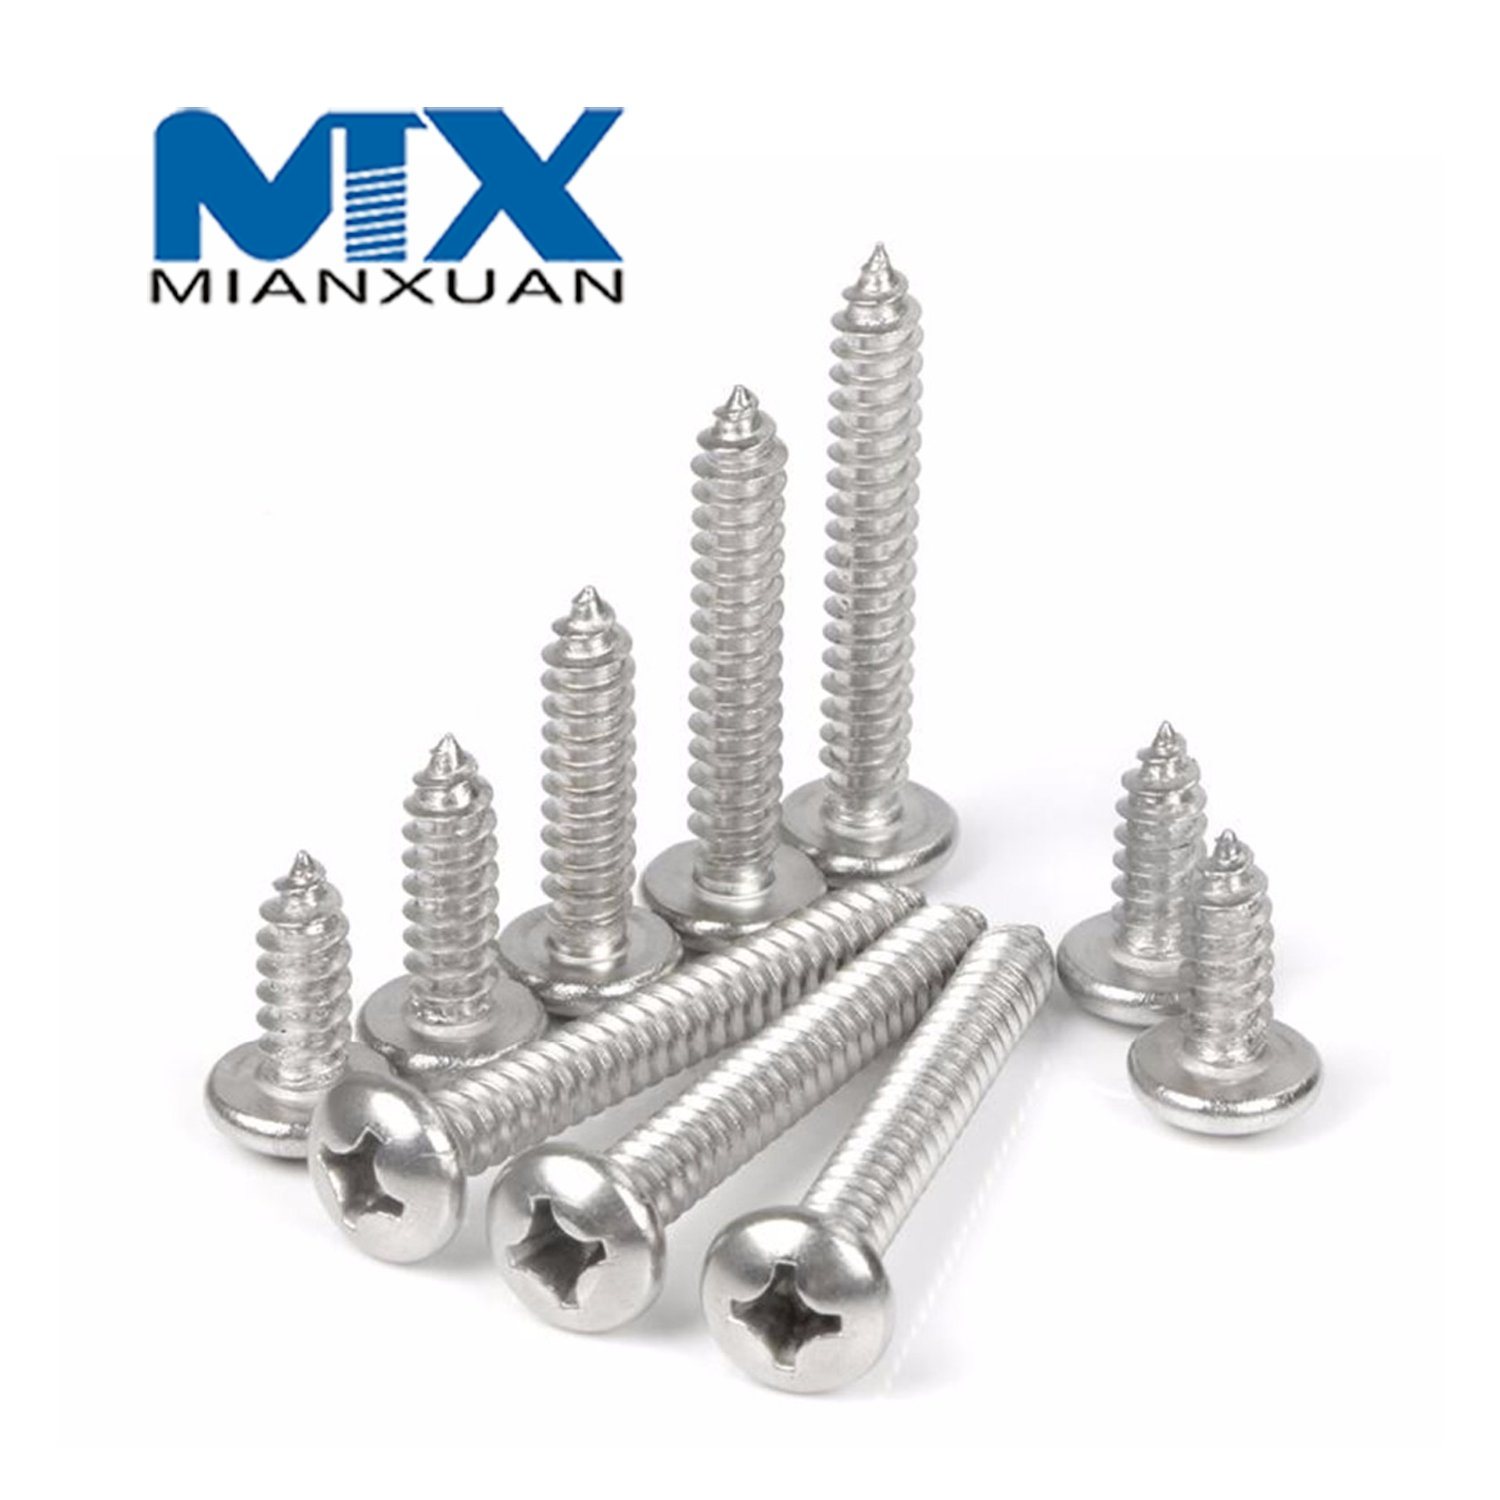 Yb845 Screw Stainless Steel Standard Manufacturer A2 A4 18-8